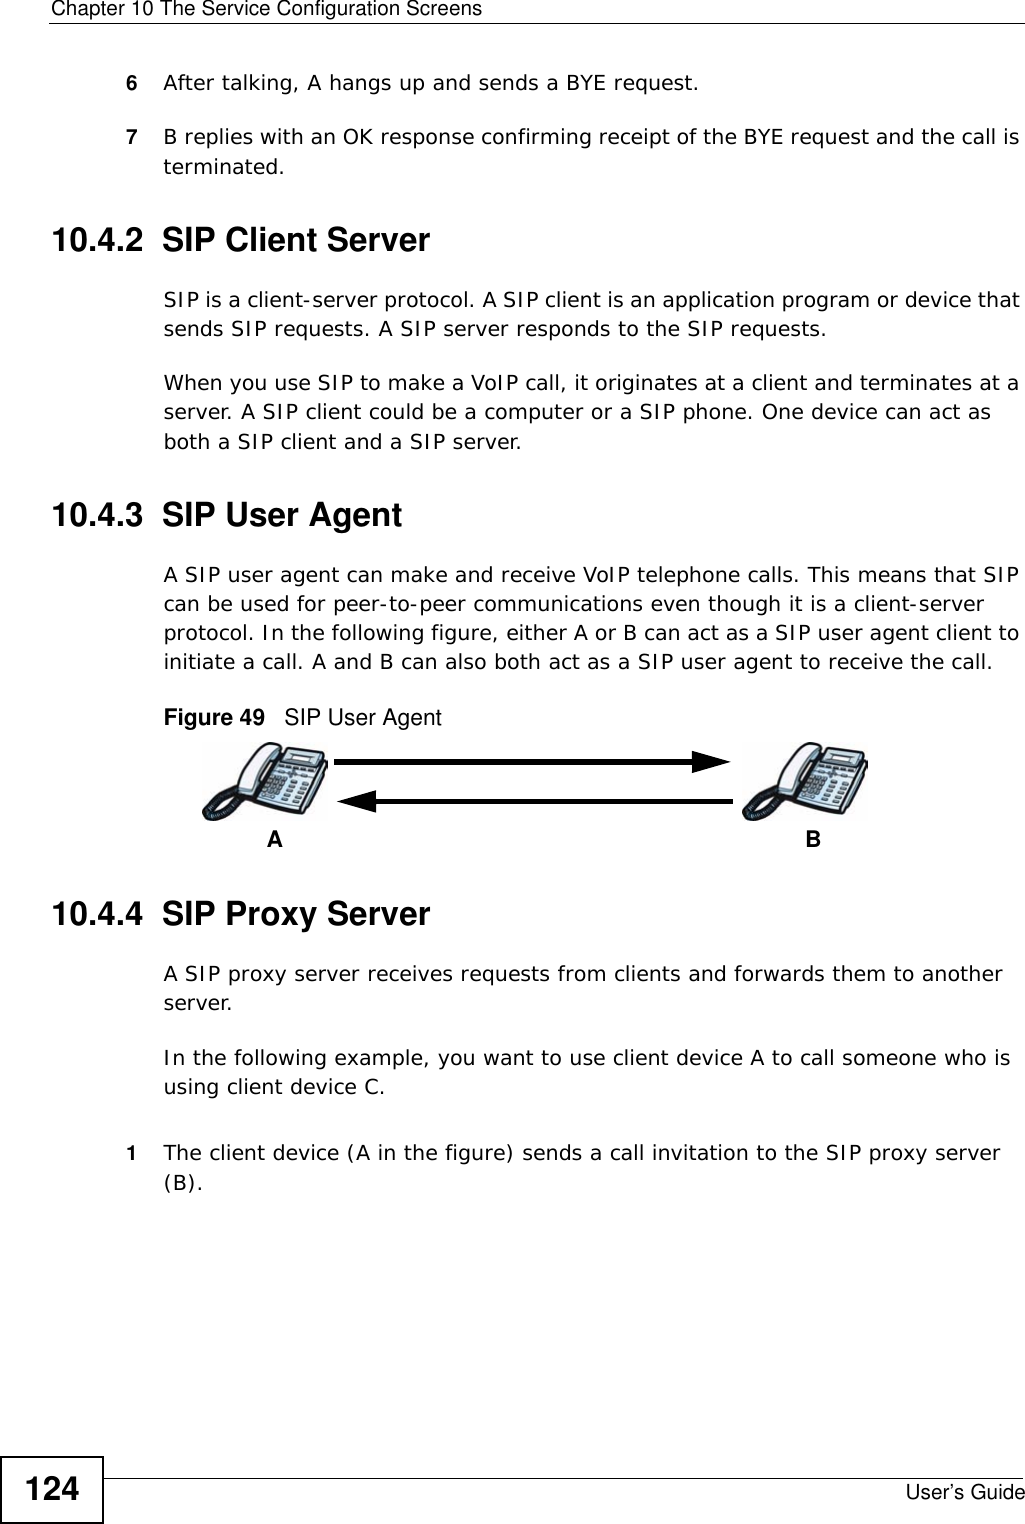 Chapter 10 The Service Configuration ScreensUser’s Guide1246After talking, A hangs up and sends a BYE request. 7B replies with an OK response confirming receipt of the BYE request and the call is terminated.10.4.2  SIP Client ServerSIP is a client-server protocol. A SIP client is an application program or device that sends SIP requests. A SIP server responds to the SIP requests. When you use SIP to make a VoIP call, it originates at a client and terminates at a server. A SIP client could be a computer or a SIP phone. One device can act as both a SIP client and a SIP server. 10.4.3  SIP User Agent A SIP user agent can make and receive VoIP telephone calls. This means that SIP can be used for peer-to-peer communications even though it is a client-server protocol. In the following figure, either A or B can act as a SIP user agent client to initiate a call. A and B can also both act as a SIP user agent to receive the call.Figure 49   SIP User Agent10.4.4  SIP Proxy ServerA SIP proxy server receives requests from clients and forwards them to another server.In the following example, you want to use client device A to call someone who is using client device C. 1The client device (A in the figure) sends a call invitation to the SIP proxy server (B).AB